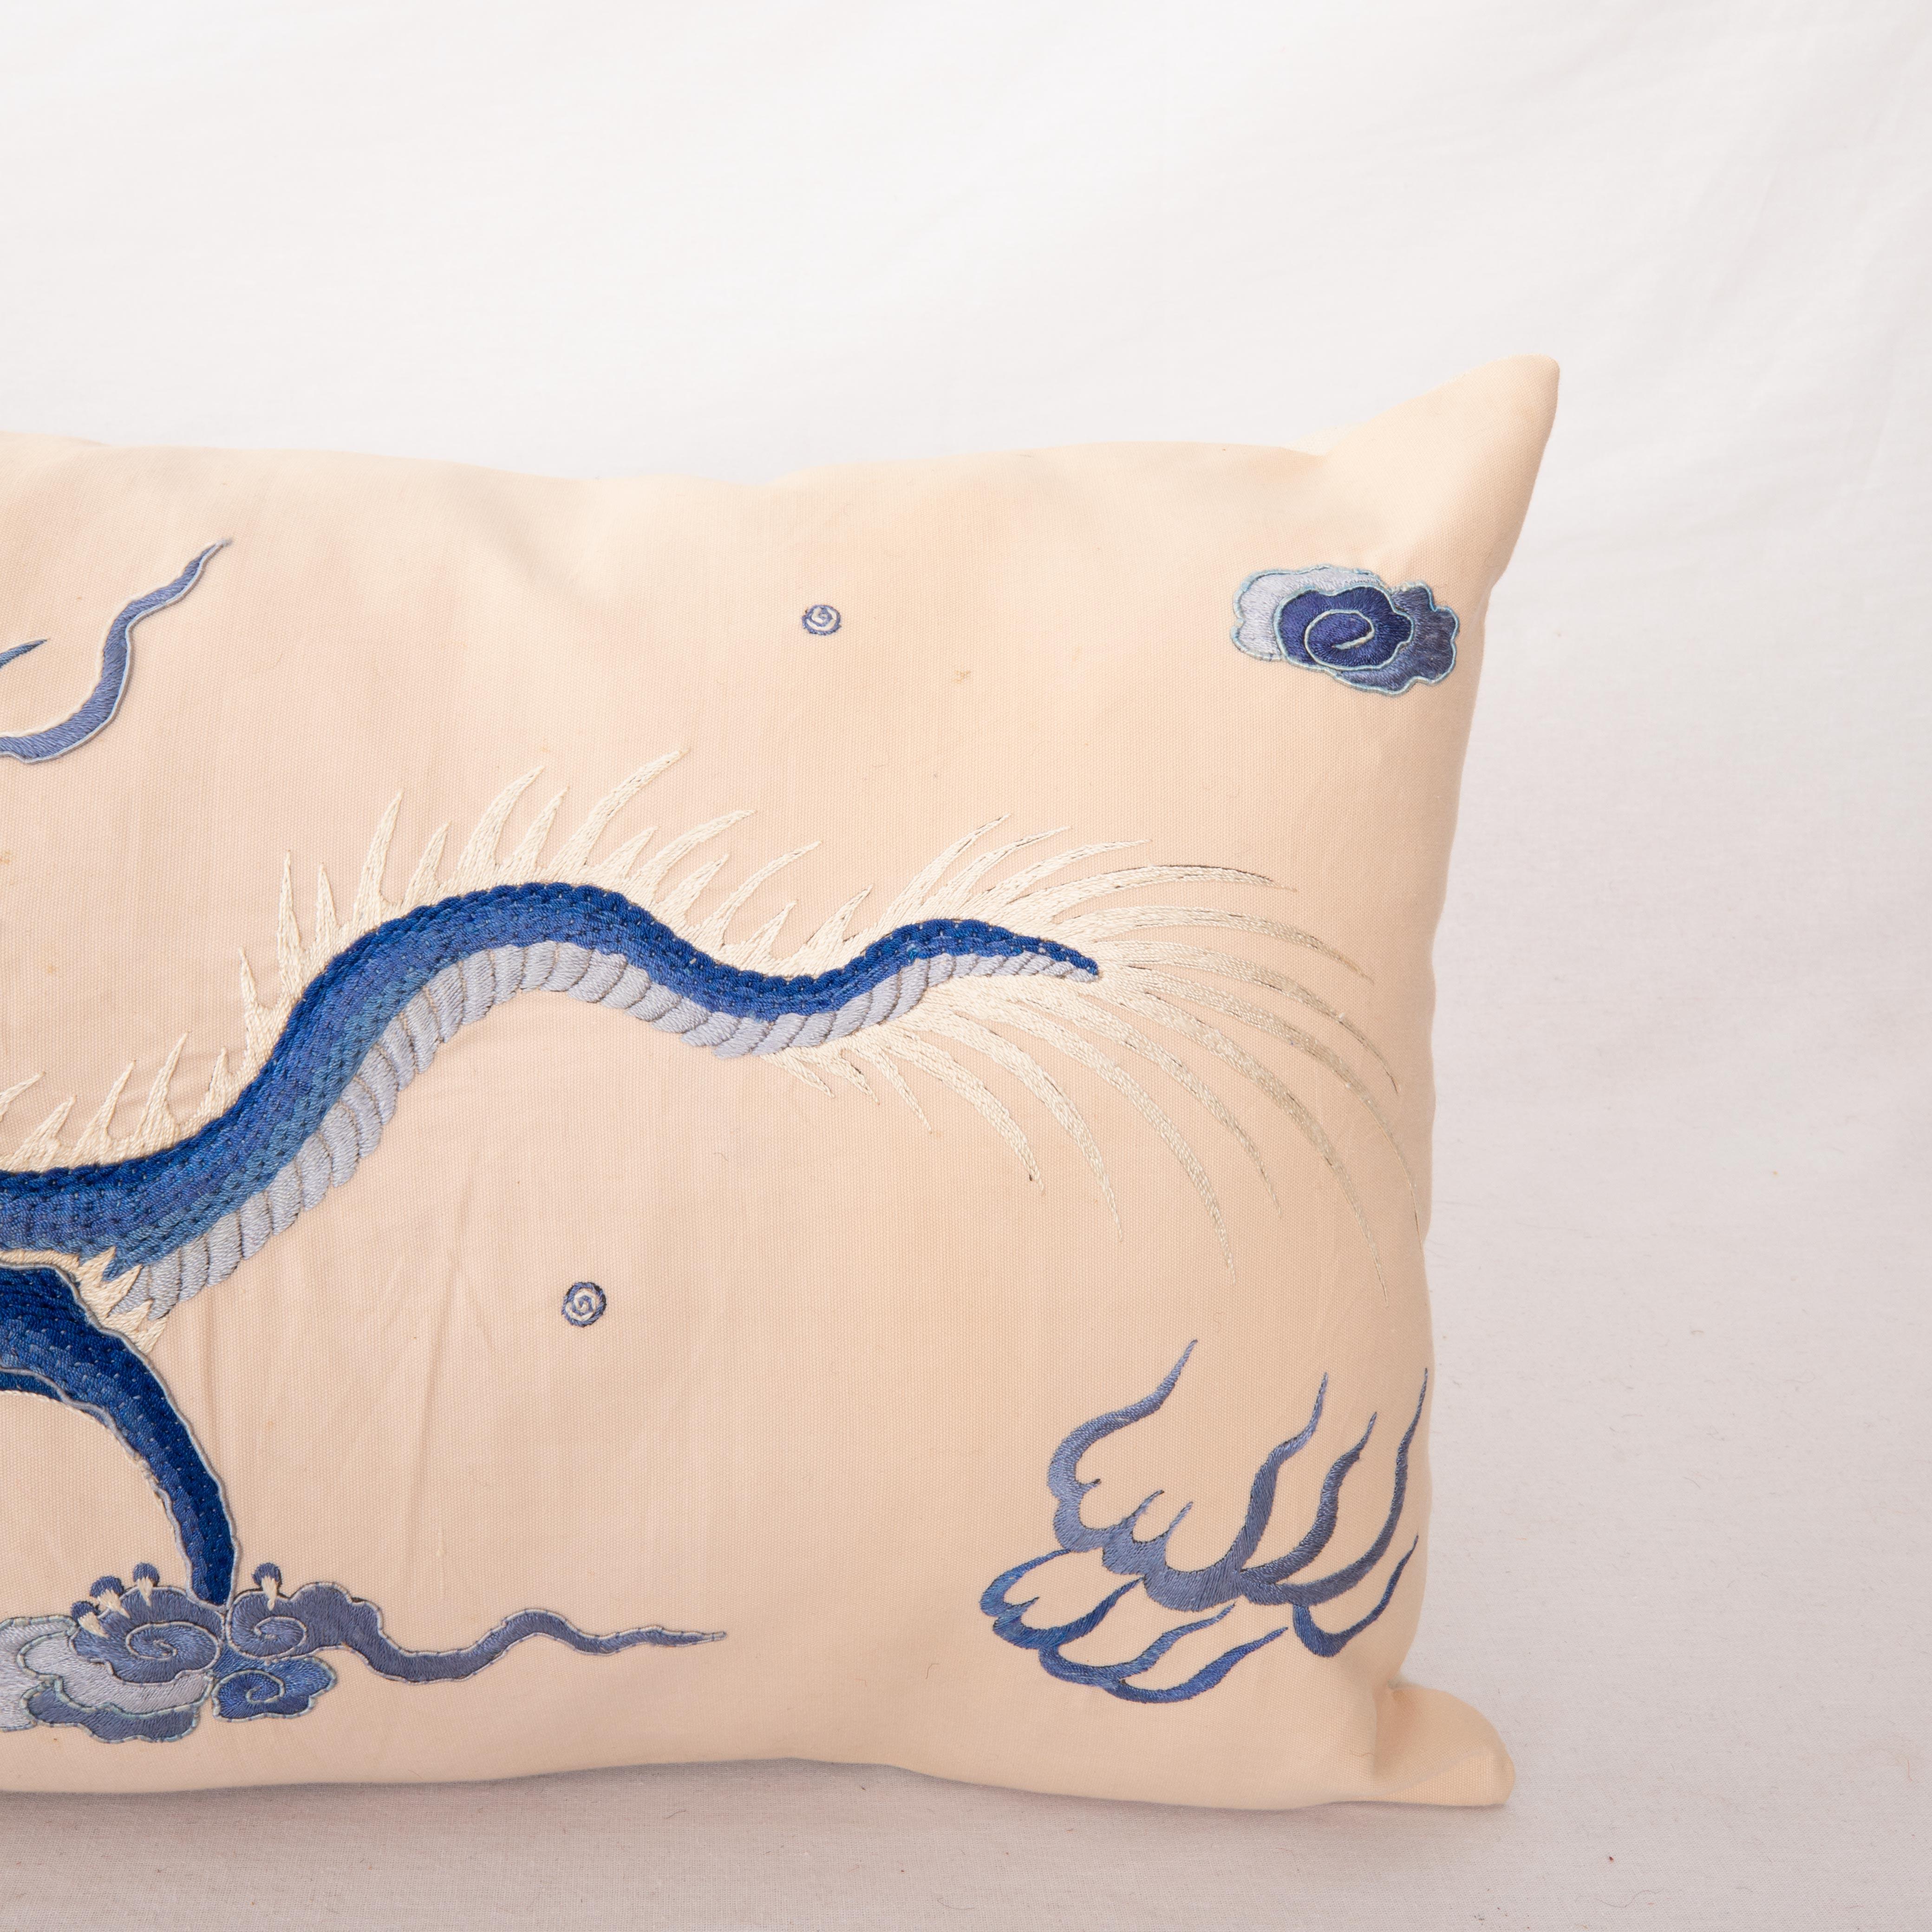 Embroidered Pillow Case Made from a Vintage Asian Embroidery, Mid-20th Century